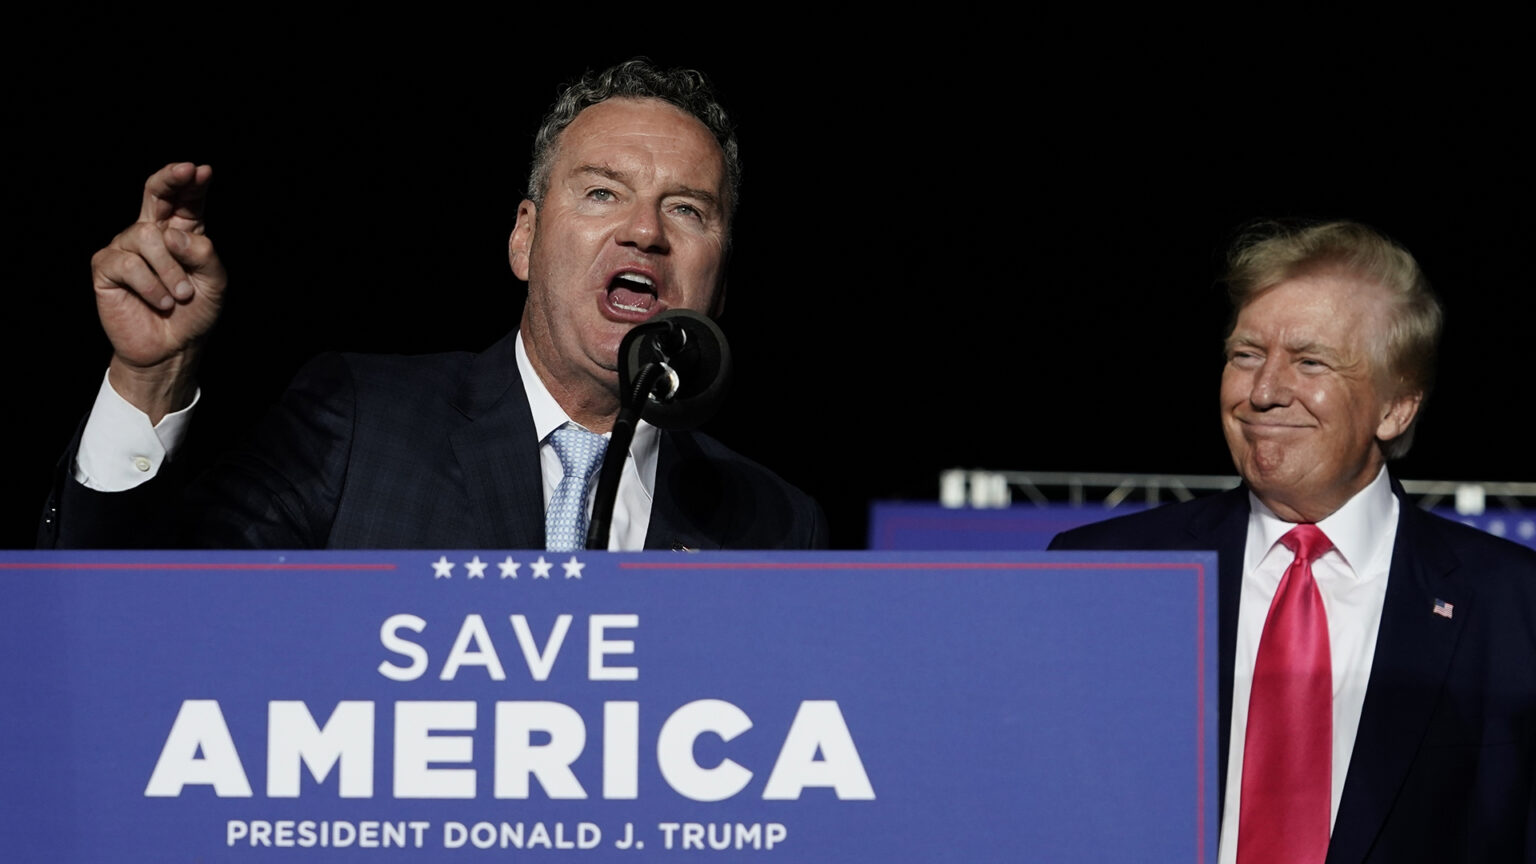 Tim Michels points with the index finger of his right hand while speaking into a microphone behind a podium printed with the words Save America and President Donald J. Trump while the Donald Trump stands to his left under a night sky.